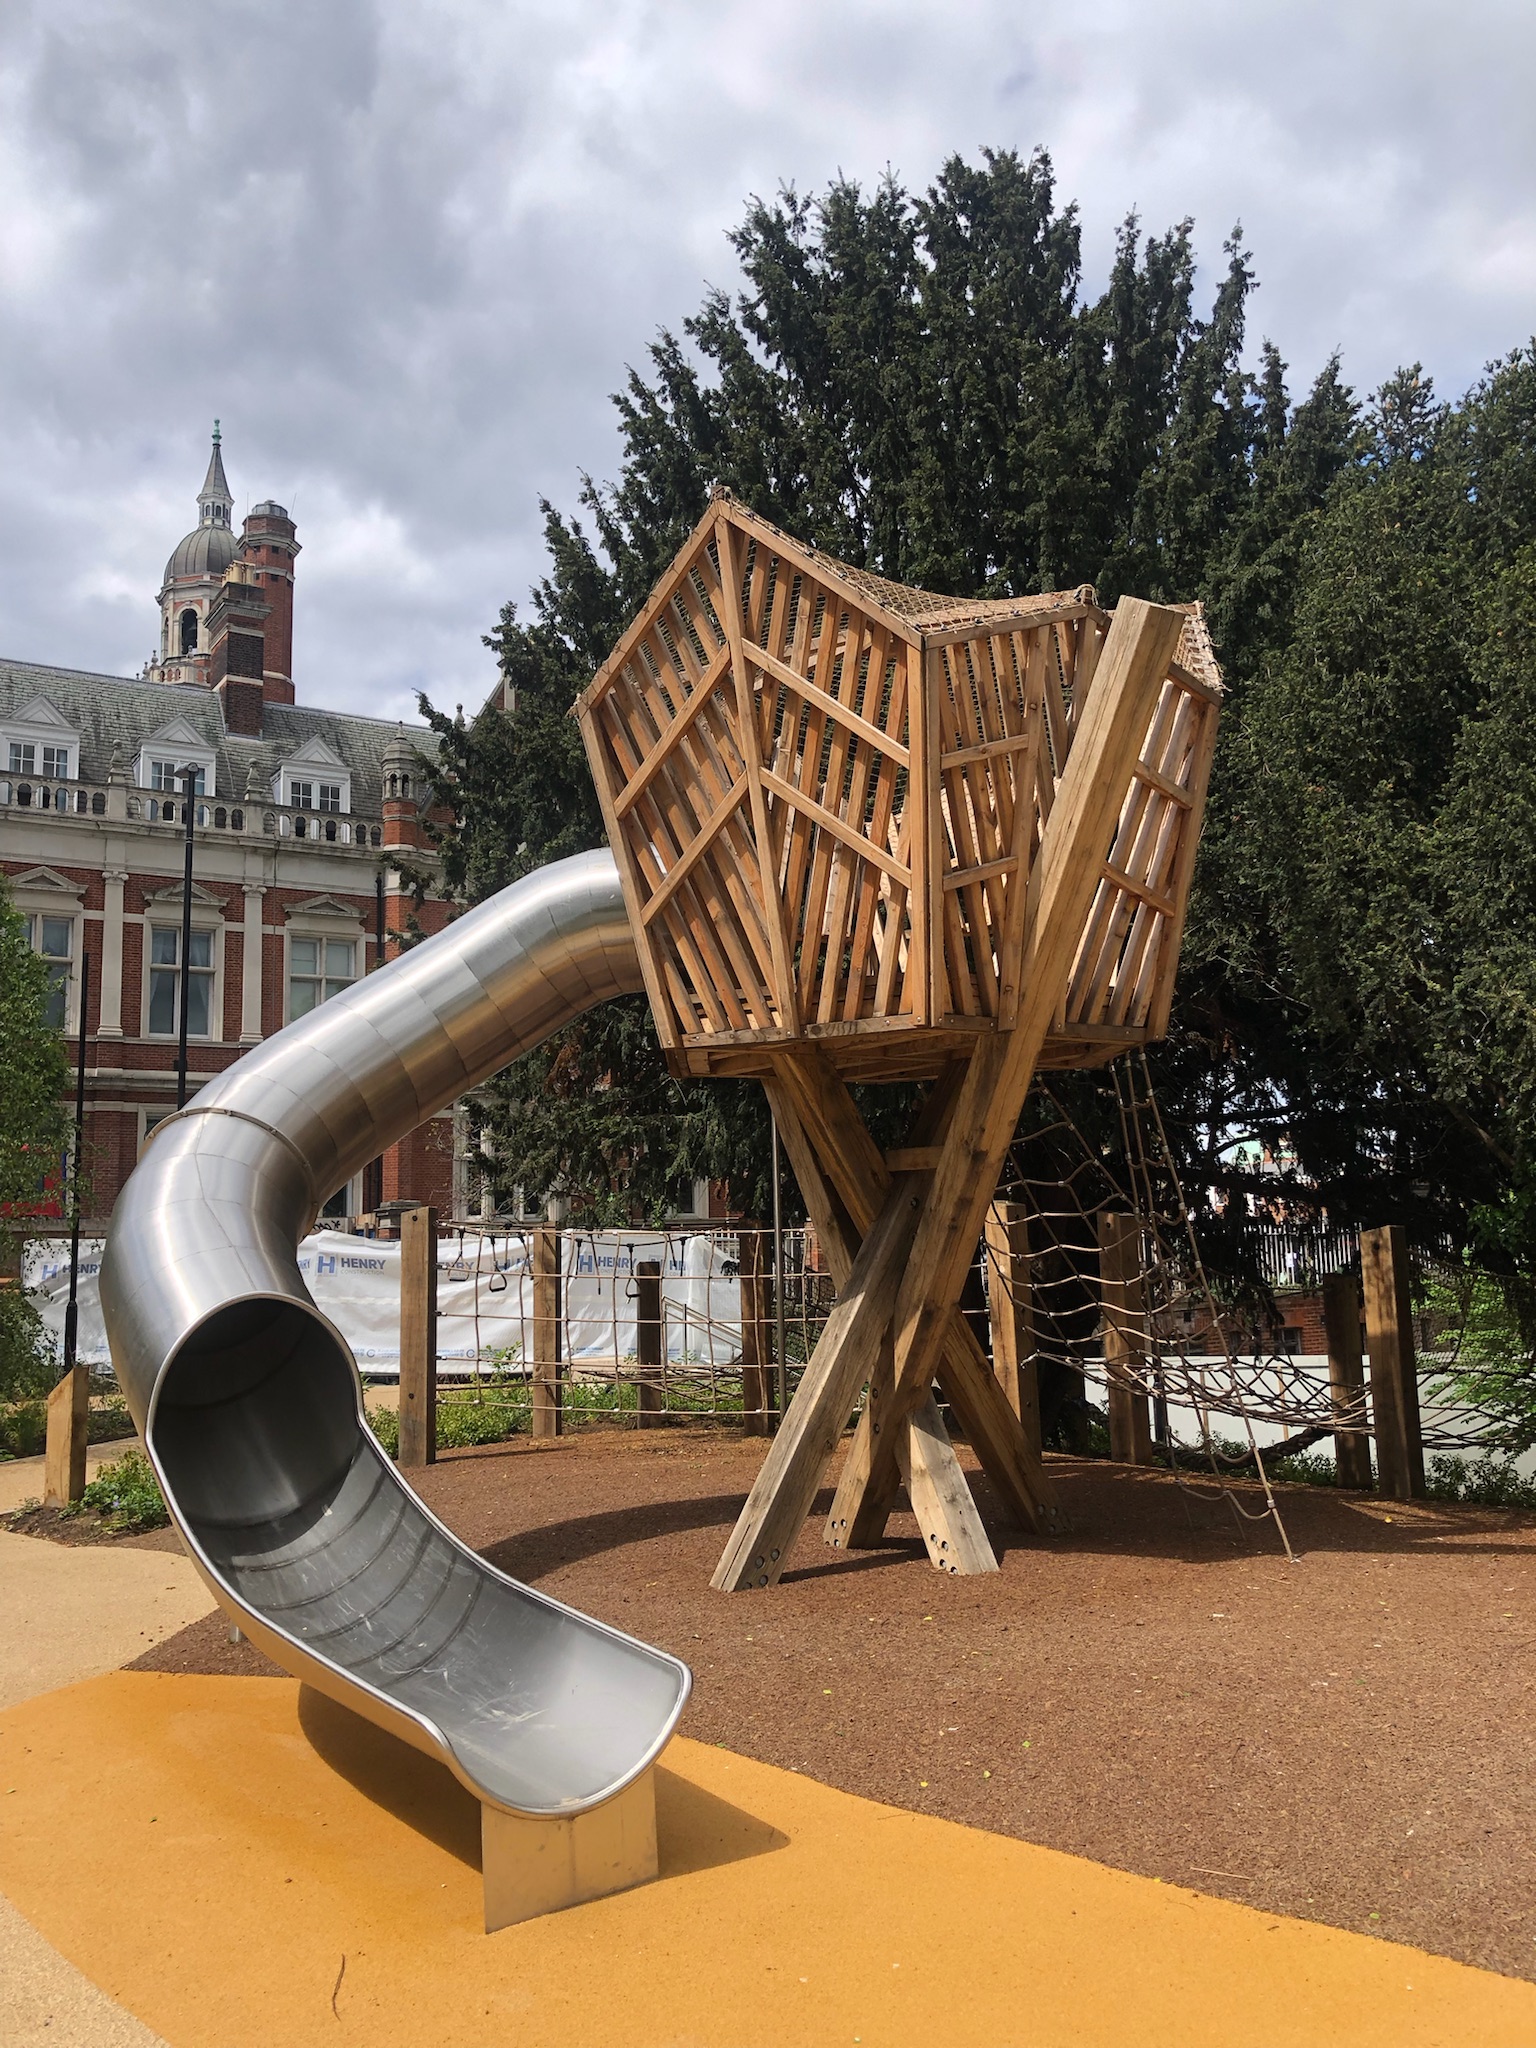 Bespoke wooden play structure